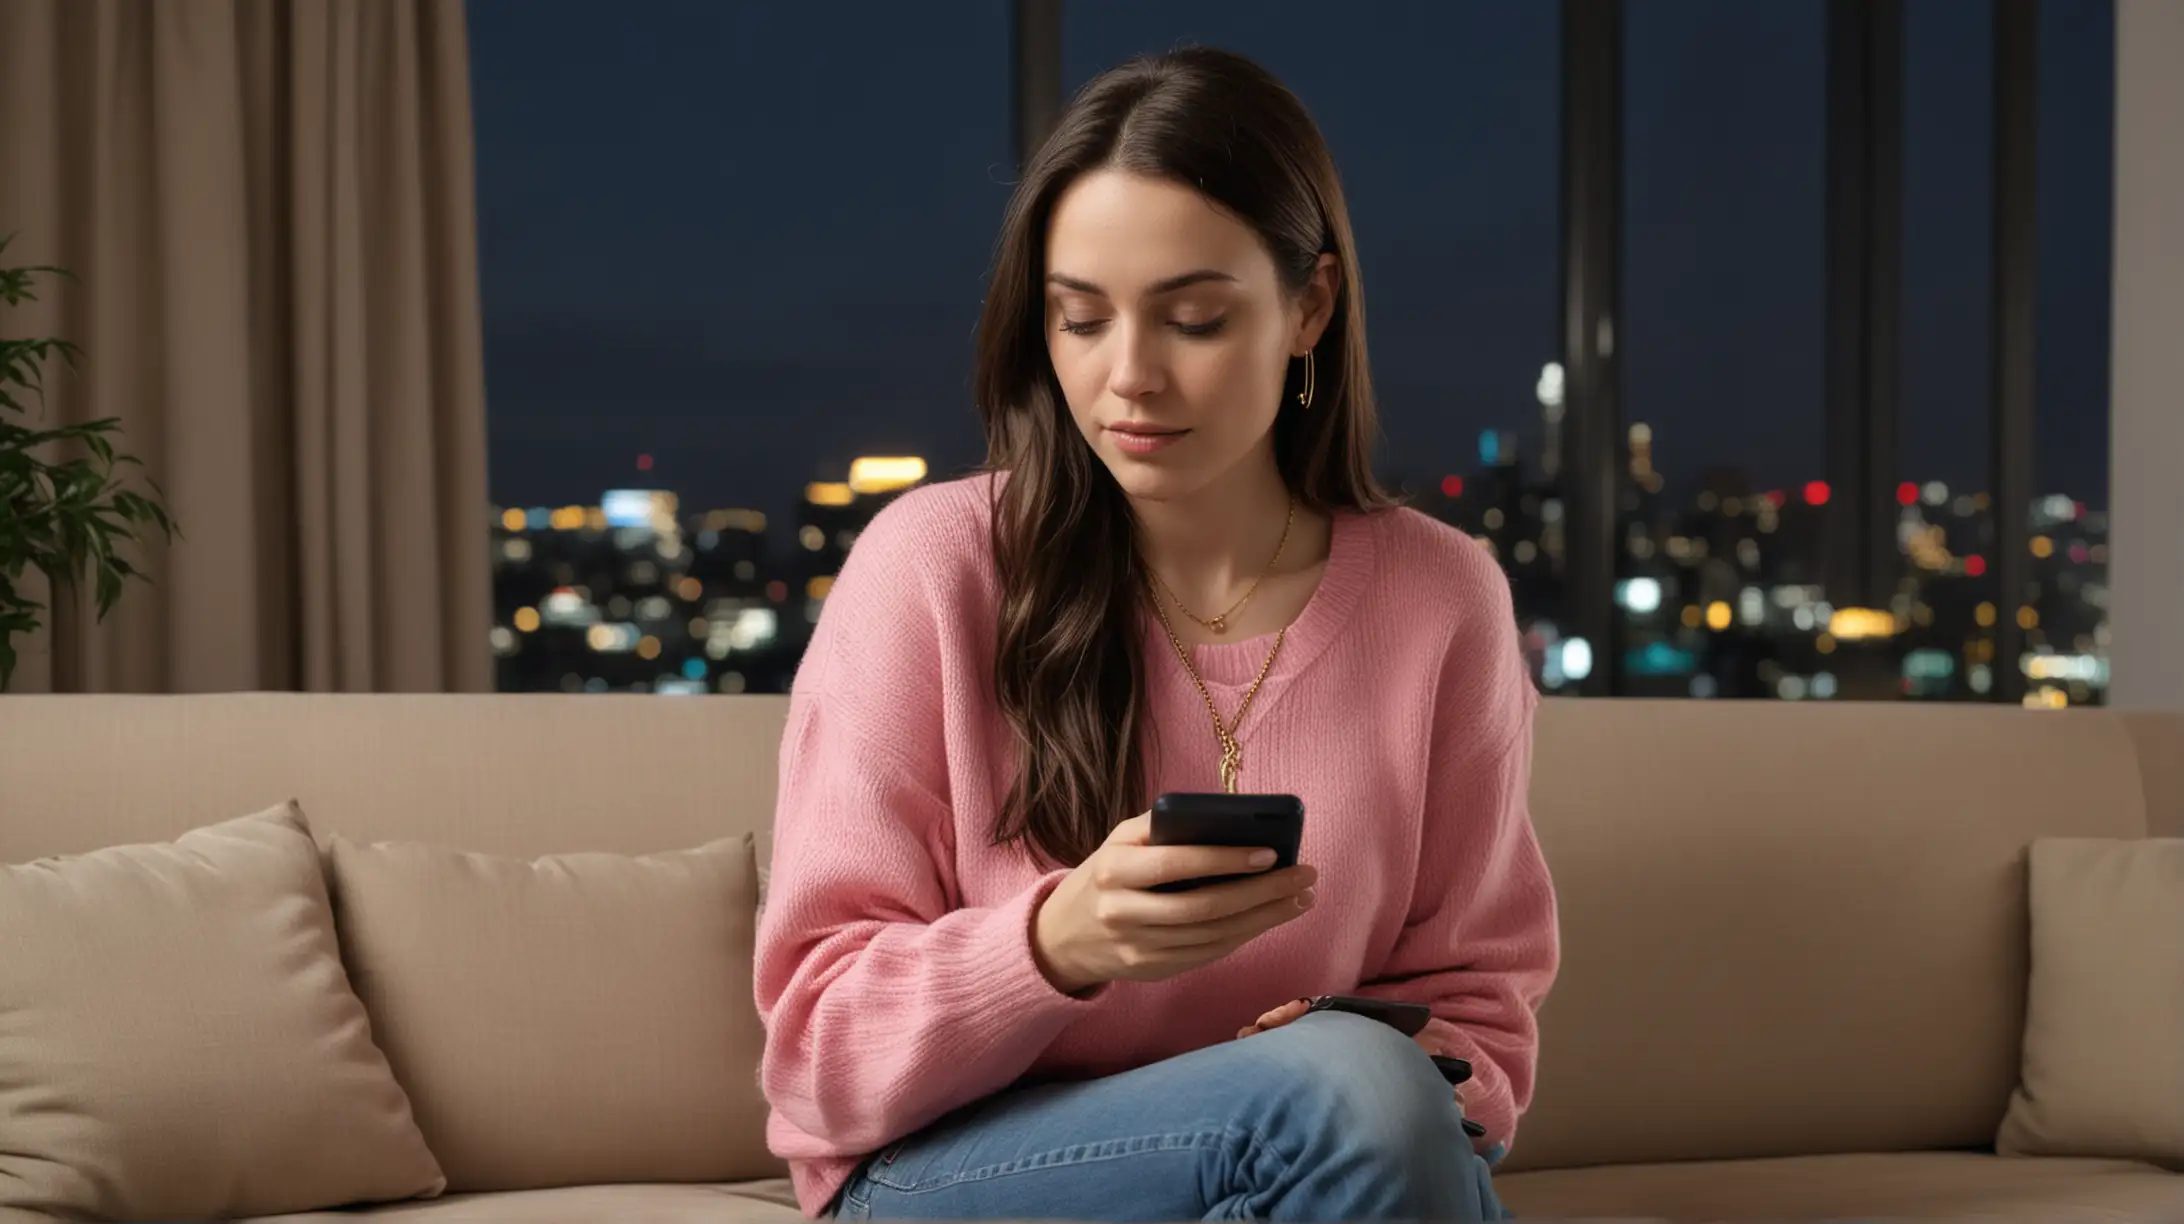 30 year old pale white woman with long dark brown hair and gold necklace, pink sweater and blue jeans. She is sitting on a couch in a modern apartment, looking at a smartphone, urban high rise background at night